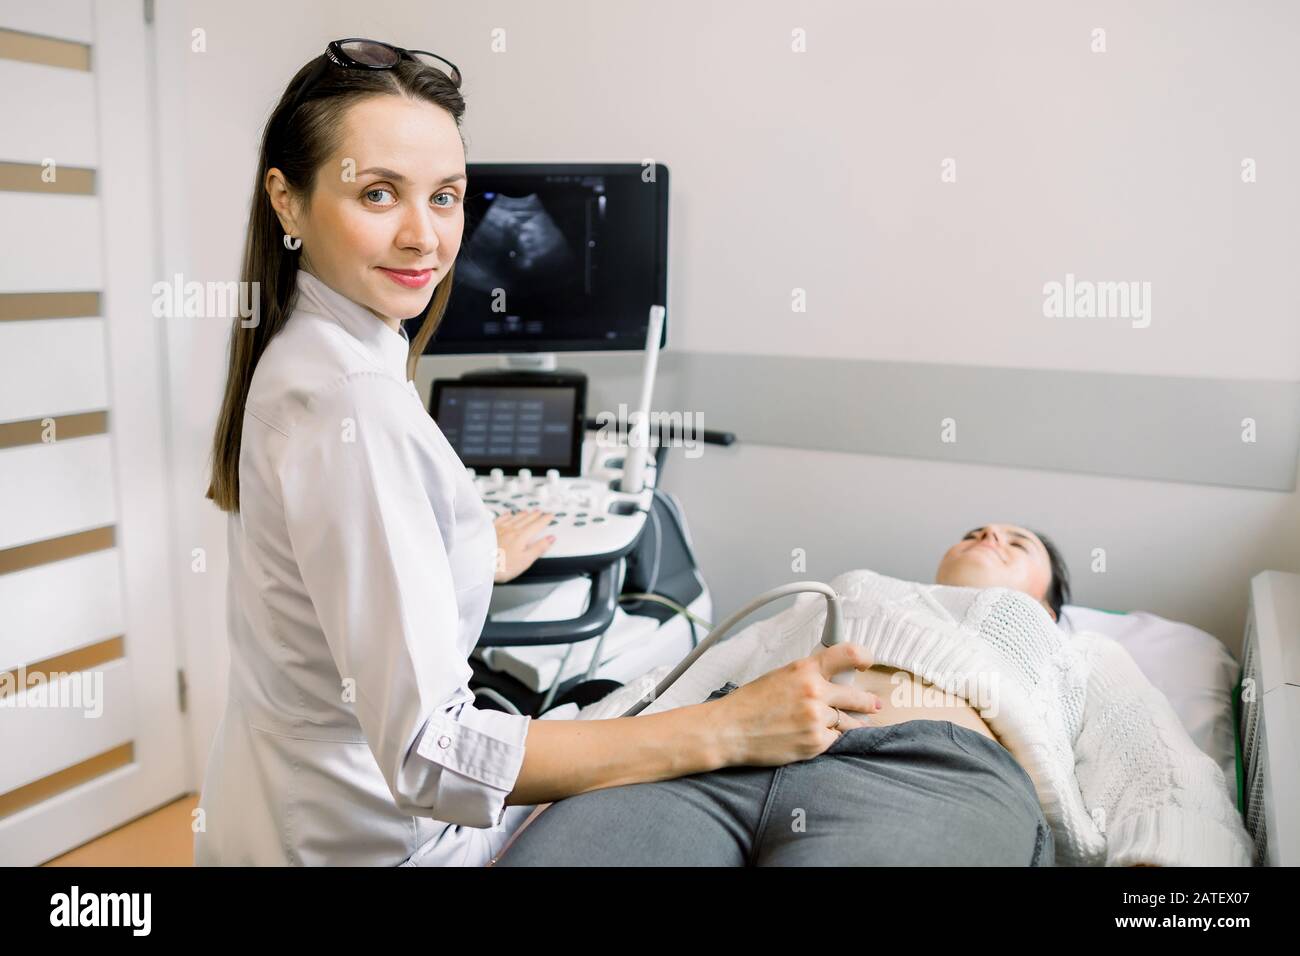 Pretty female doctor operating modern ultrasound scanner while examining belly and bladder of her female patient. Stock Photo